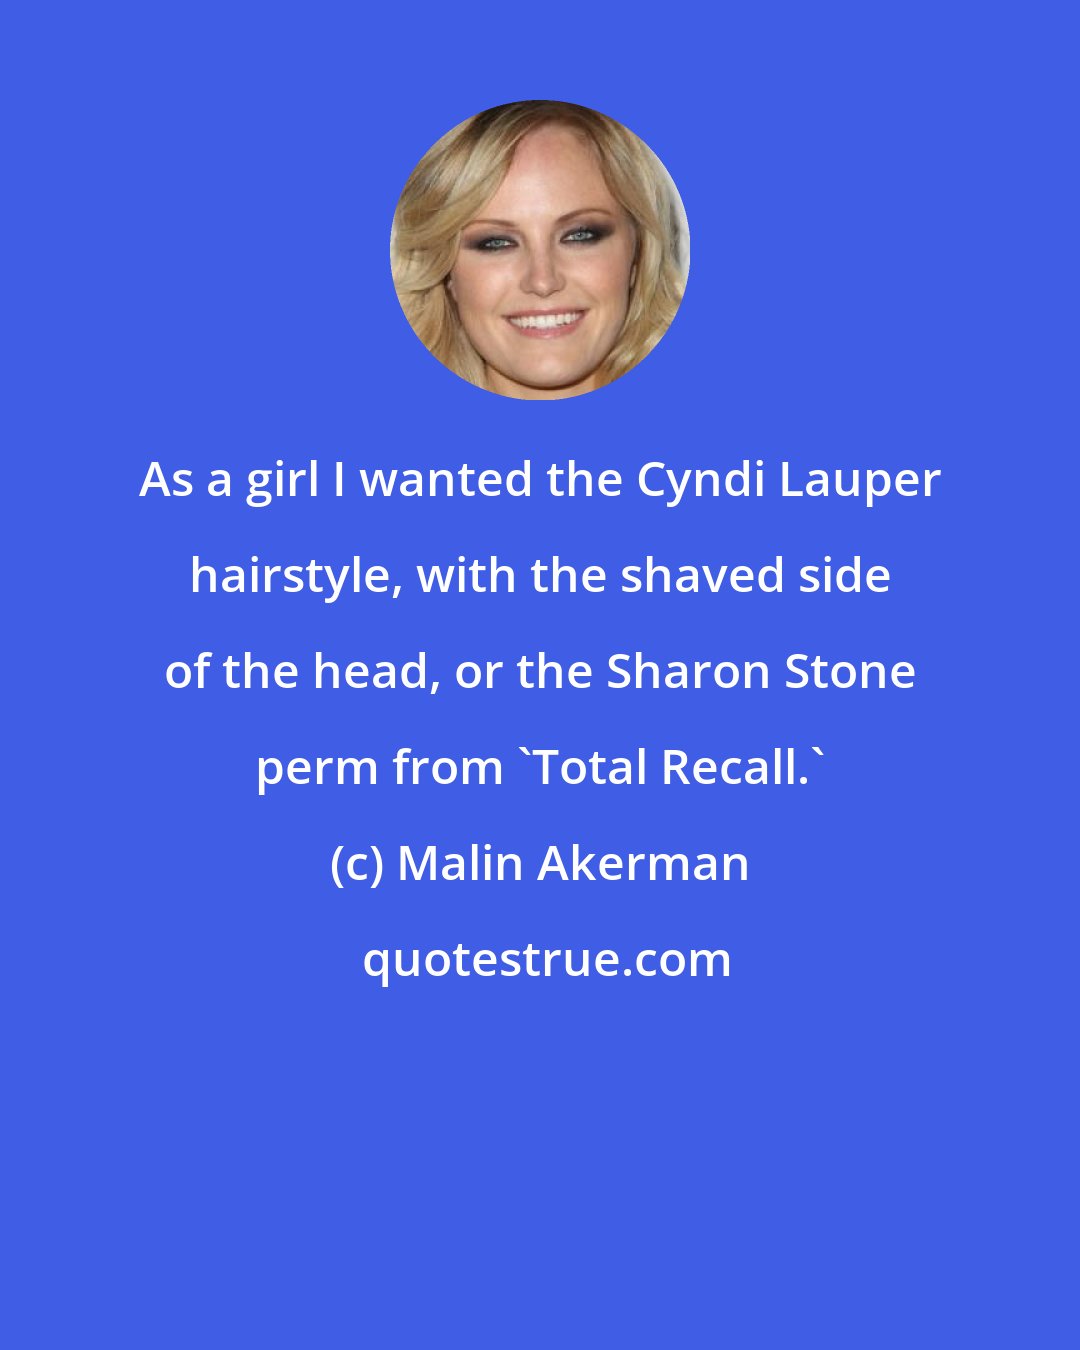 Malin Akerman: As a girl I wanted the Cyndi Lauper hairstyle, with the shaved side of the head, or the Sharon Stone perm from 'Total Recall.'